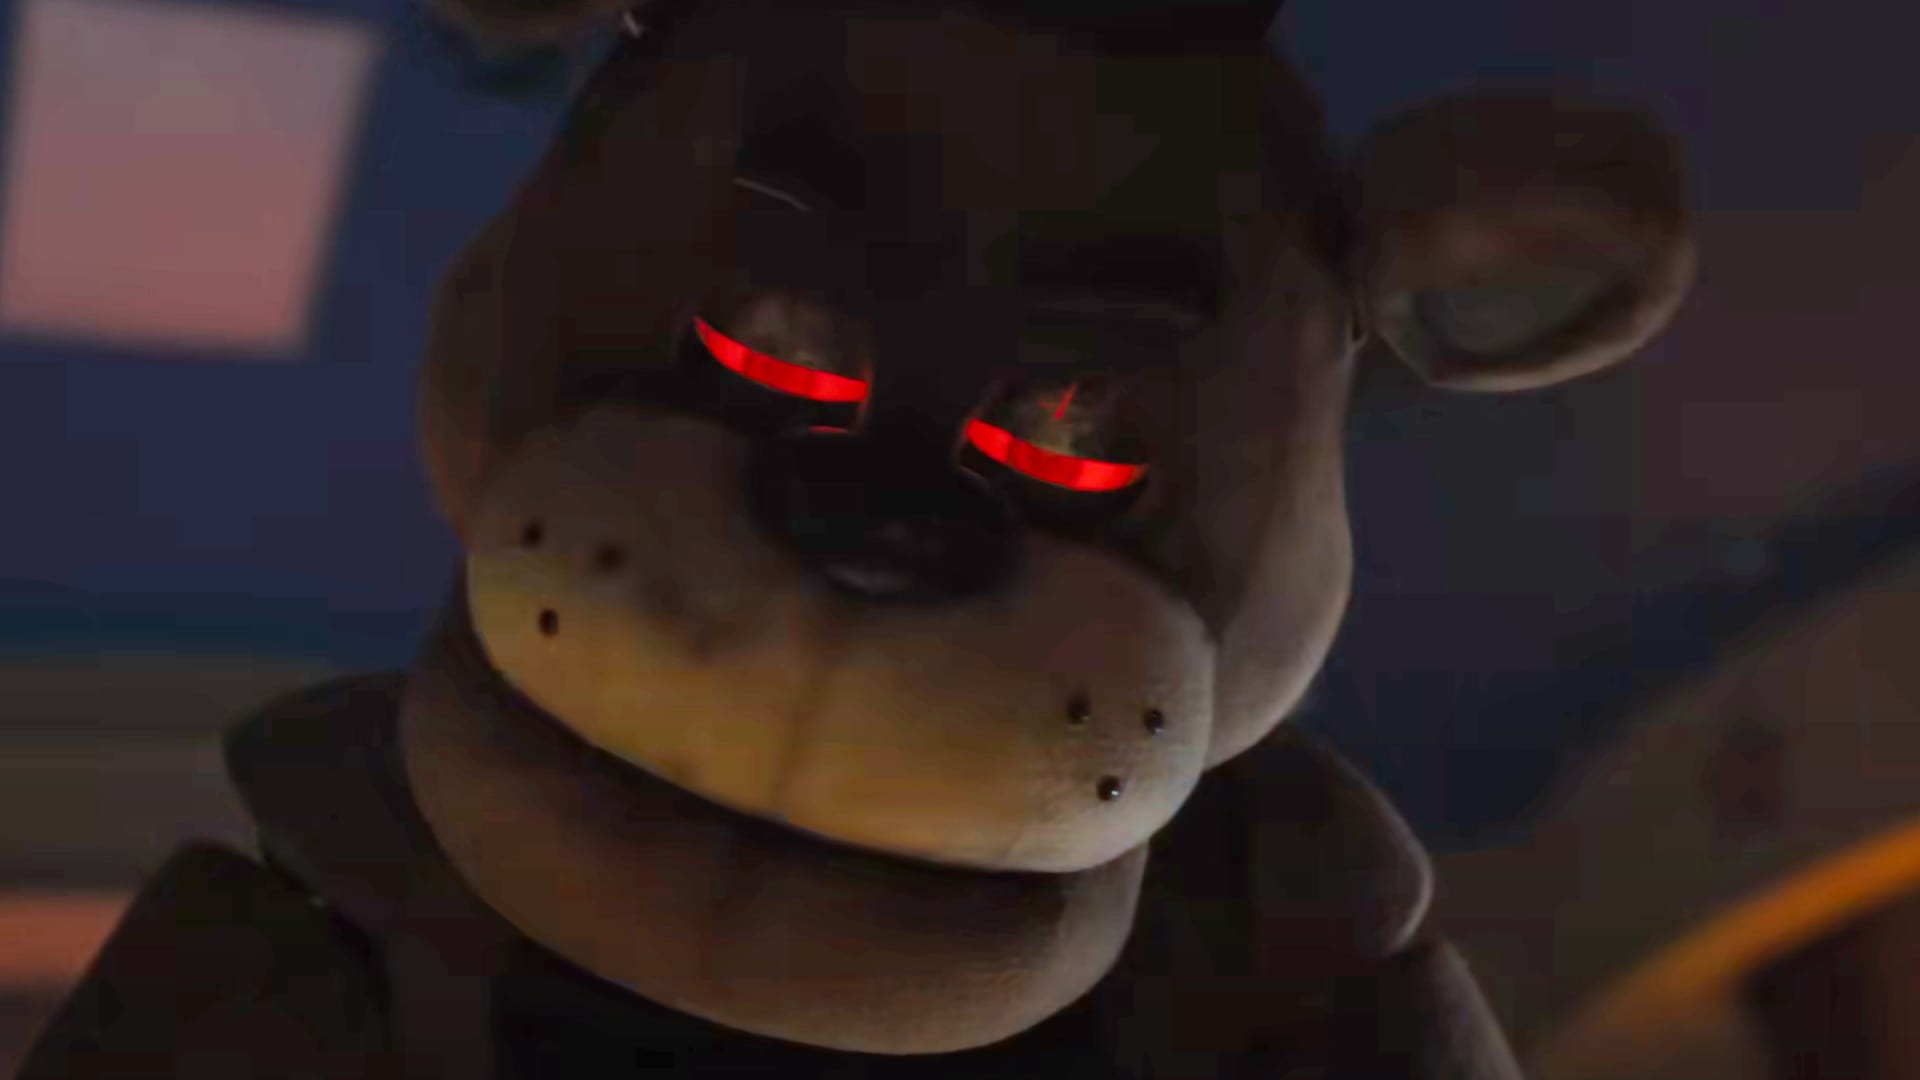 The Five Nights at Freddy's movie delivers, but only for fans of